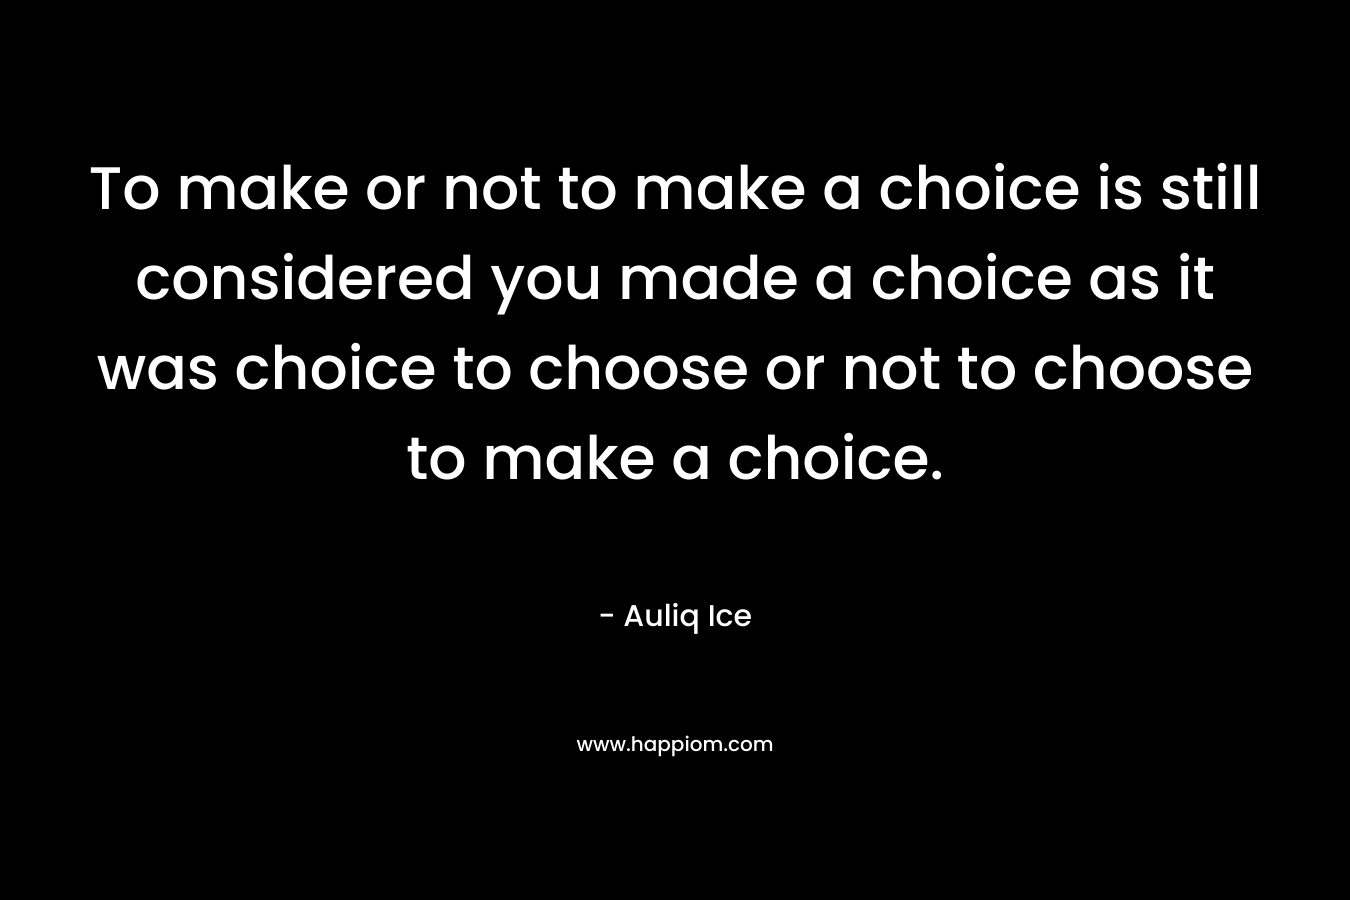 To make or not to make a choice is still considered you made a choice as it was choice to choose or not to choose to make a choice.